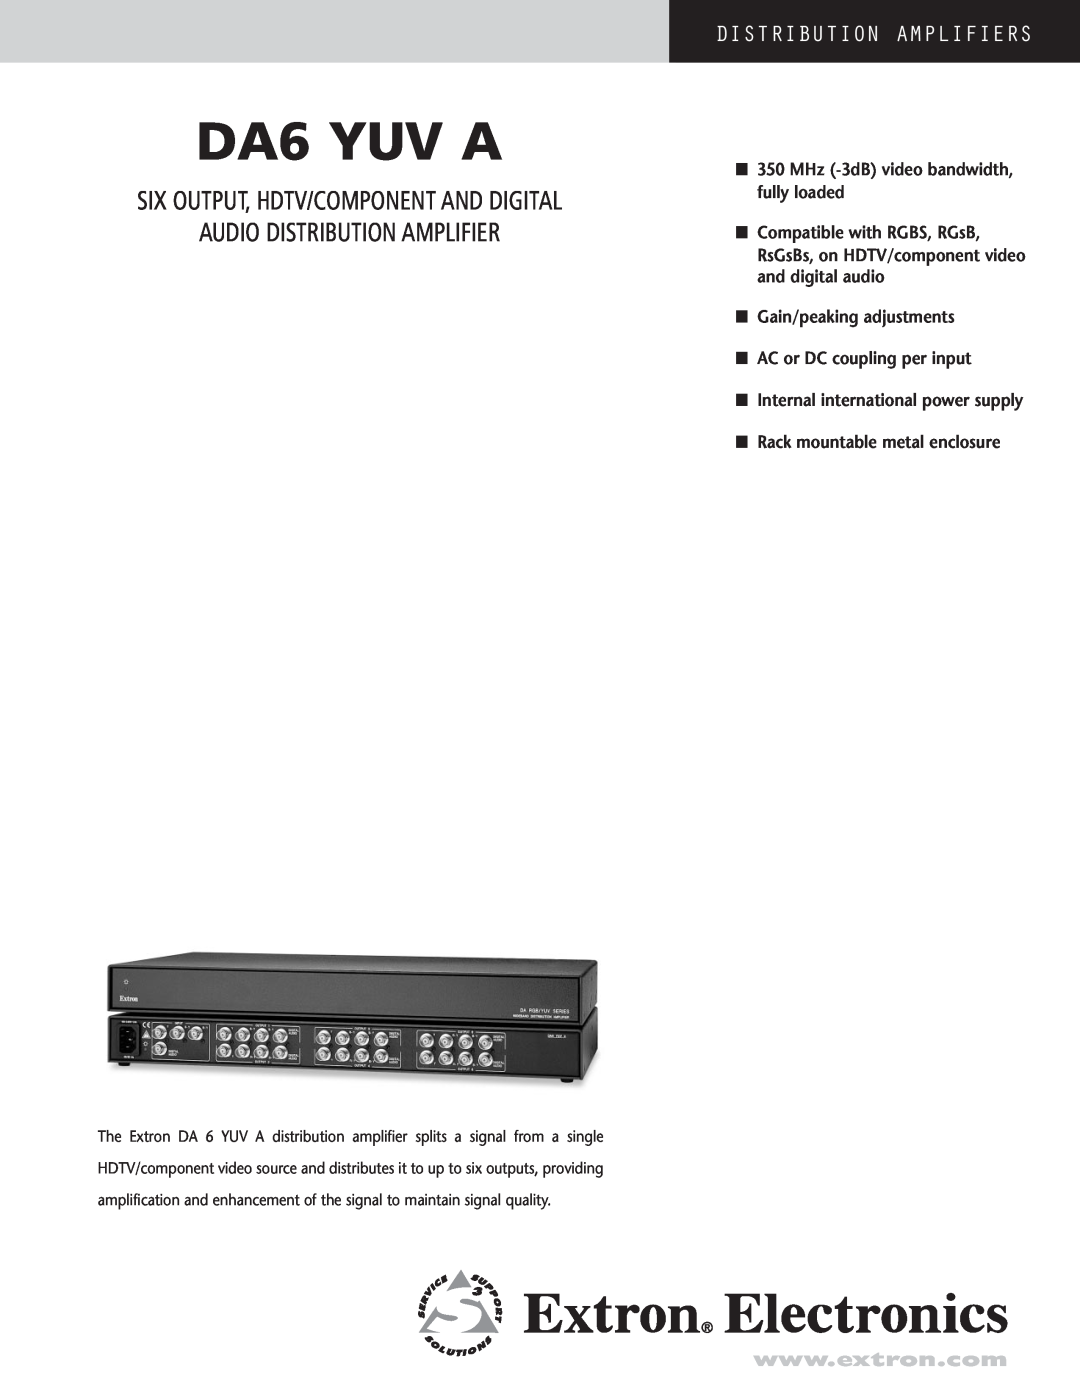 Extron electronic DA6 YUV A manual Audio Distribution Amplifier, Six Output, Hdtv/Component And Digital 